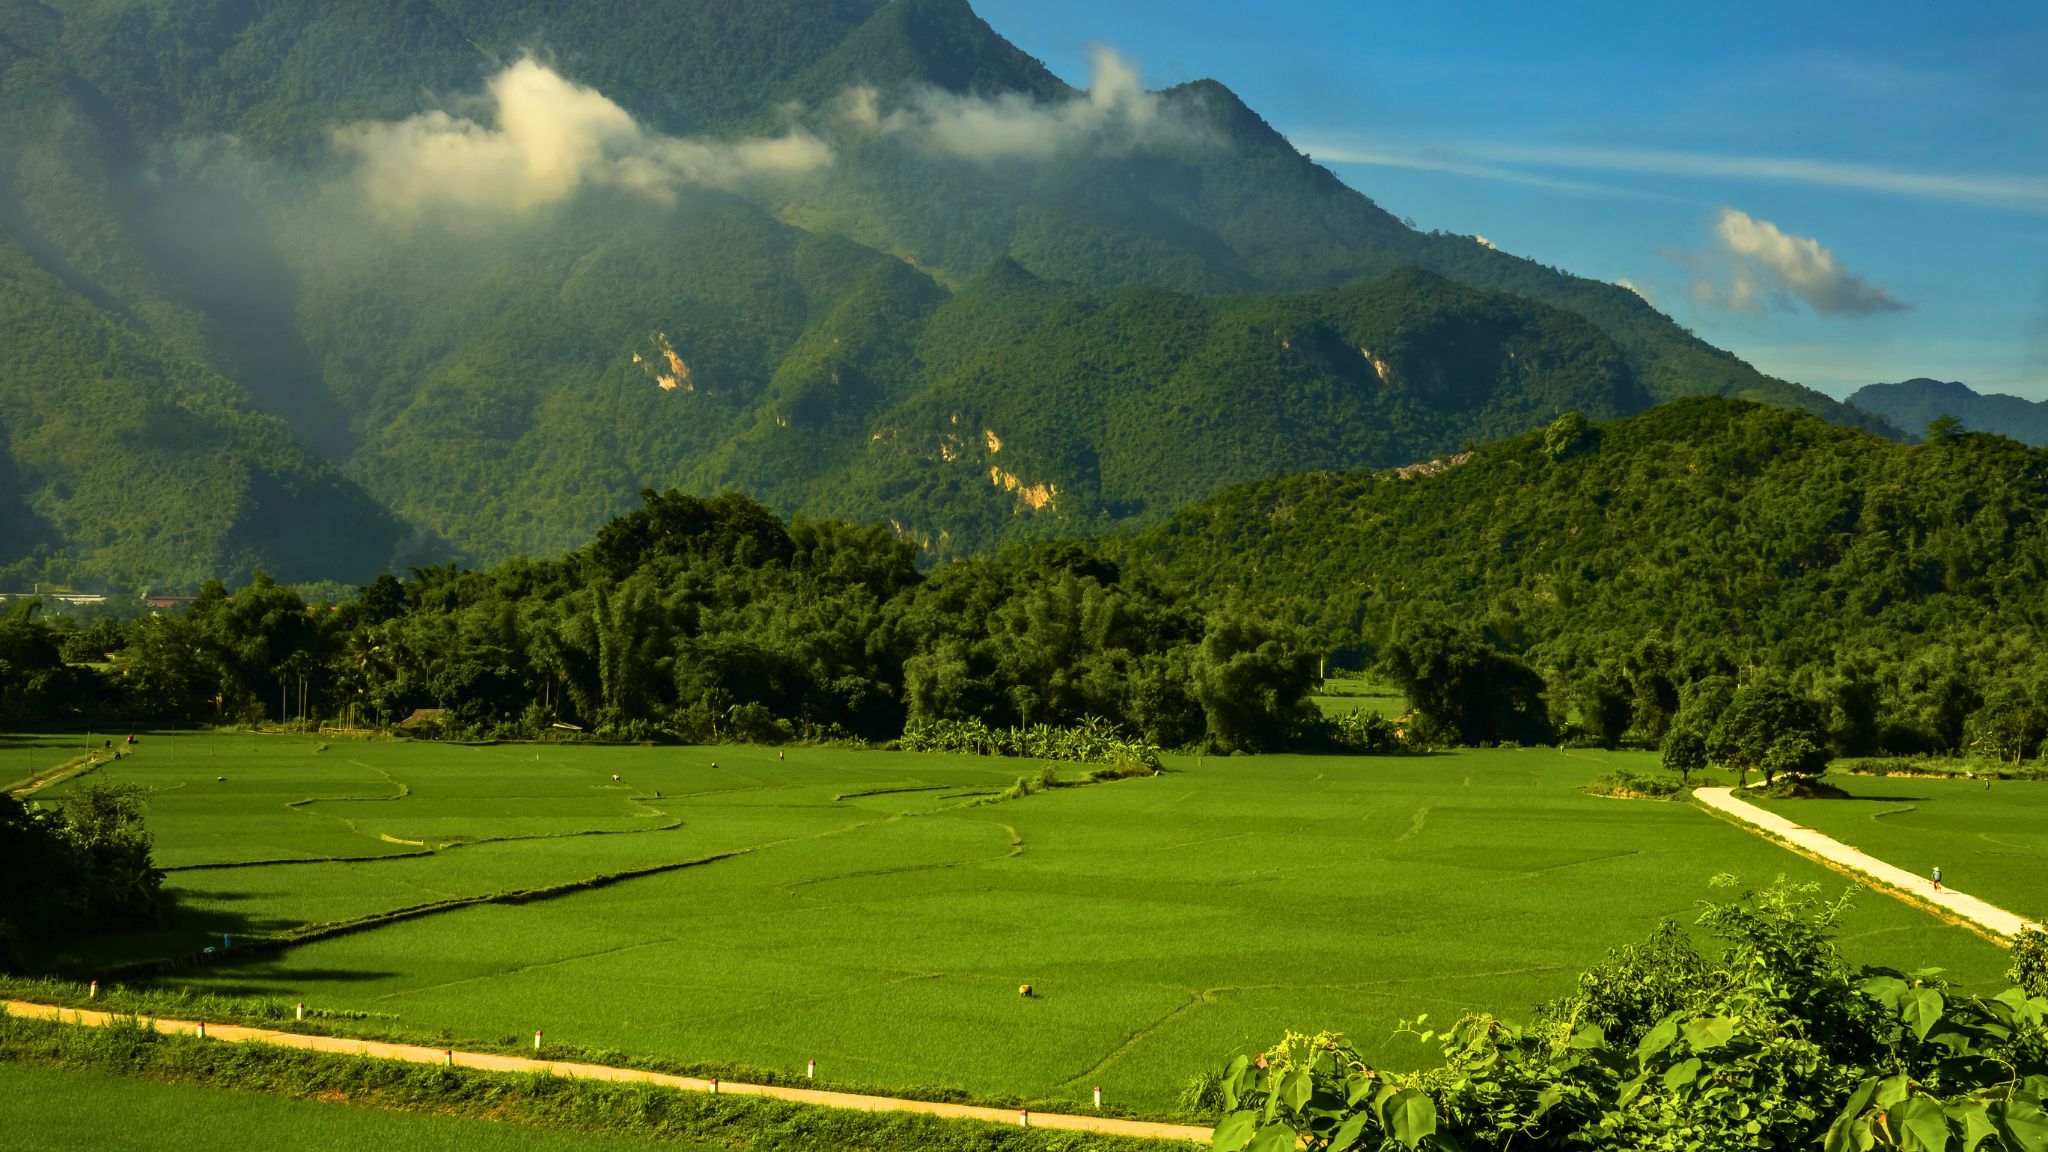 Immerse Yourself In The Tranquil Scenery Of Mai Chau